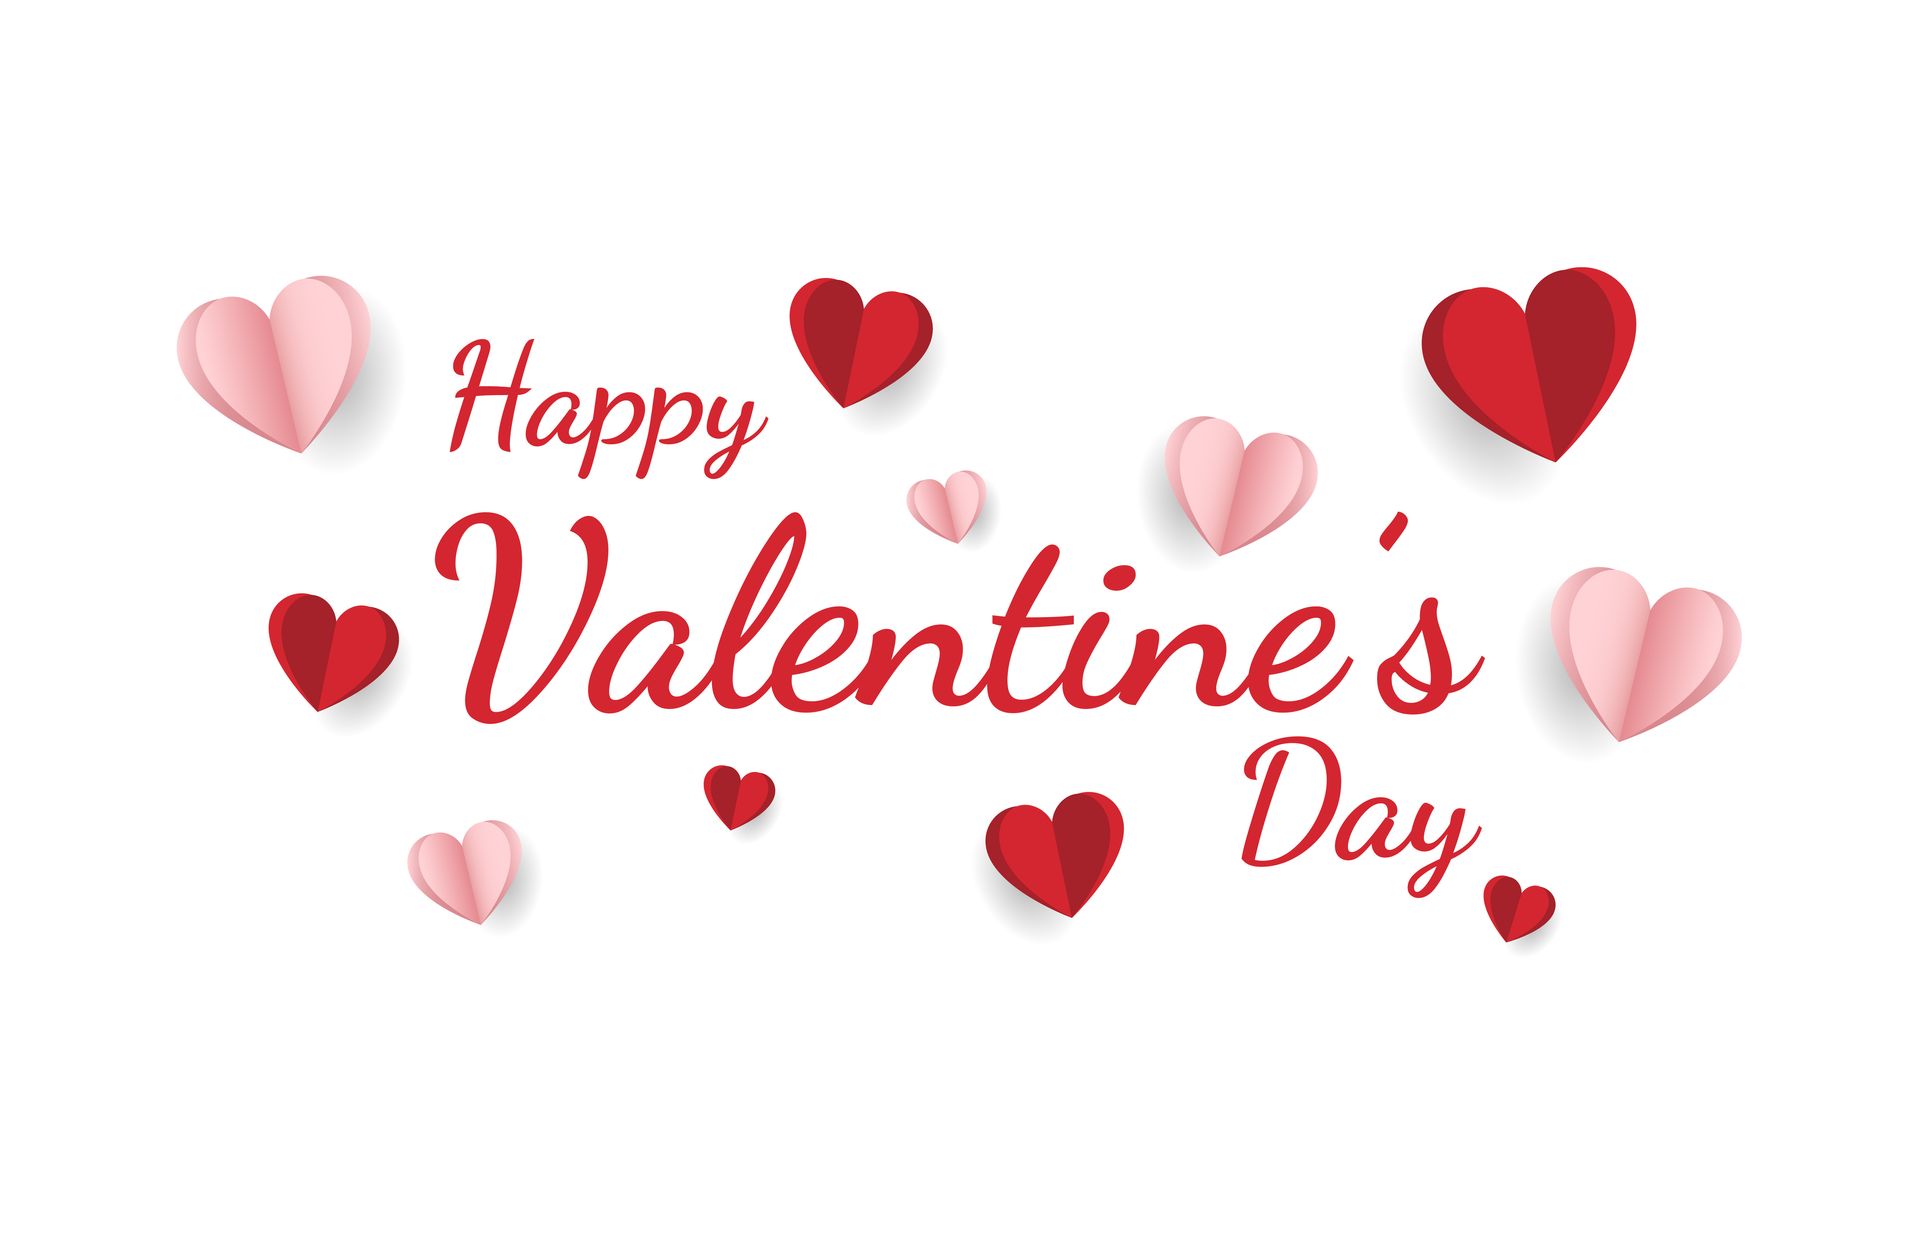 Graphic saying Happy Valentine's day in big font